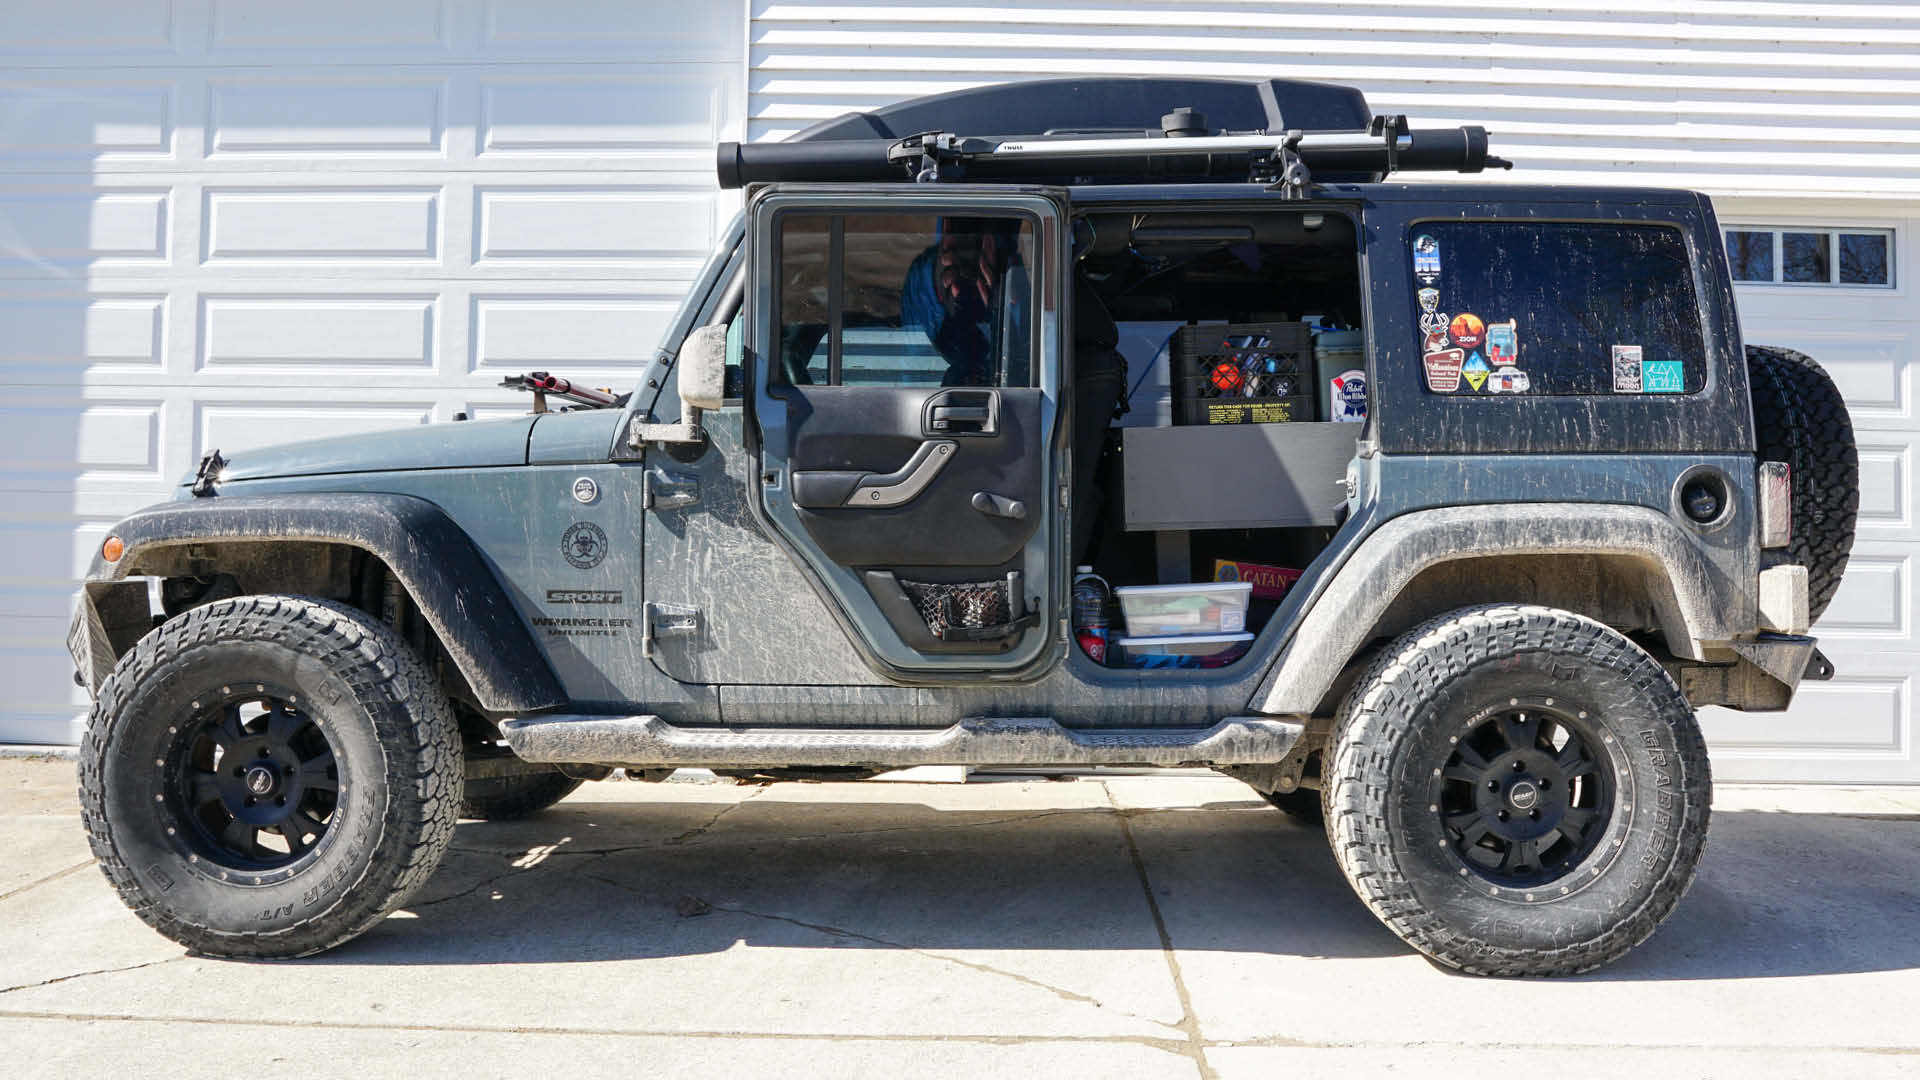 Sleep in a Jeep Wrangler 4 Door...Build a Bed! The Nomad Experiment